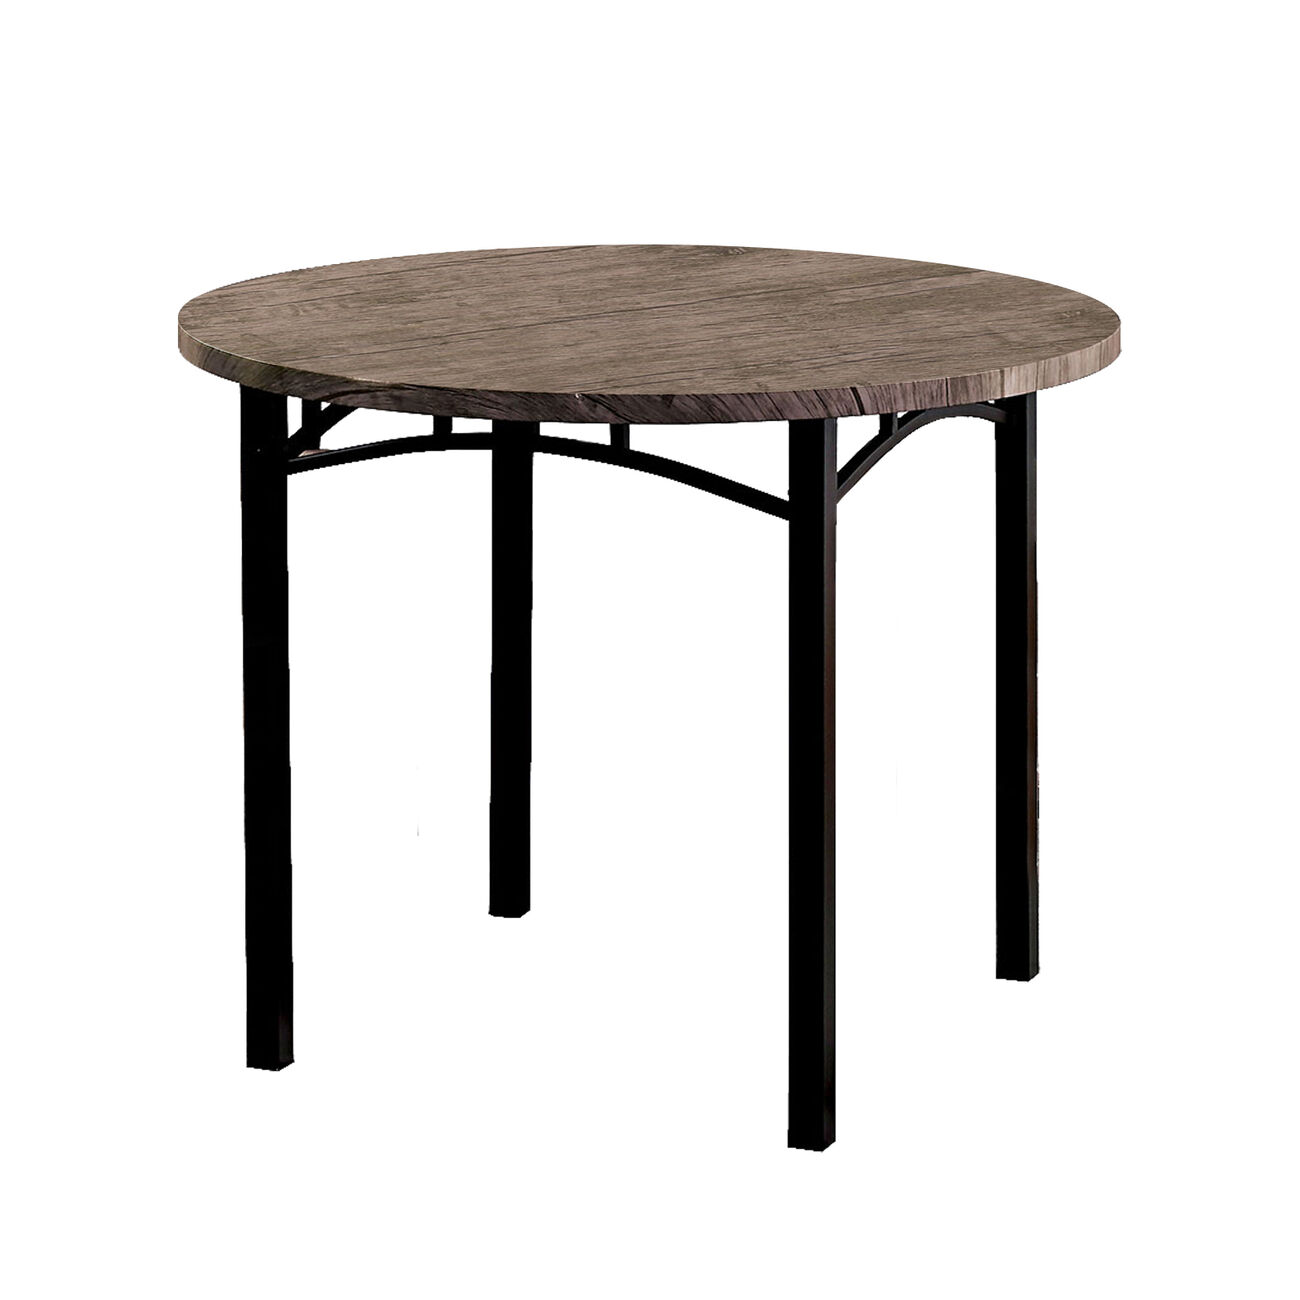 Industrial Metal Dining Table with Round Table Top and Tubular Legs, Brown